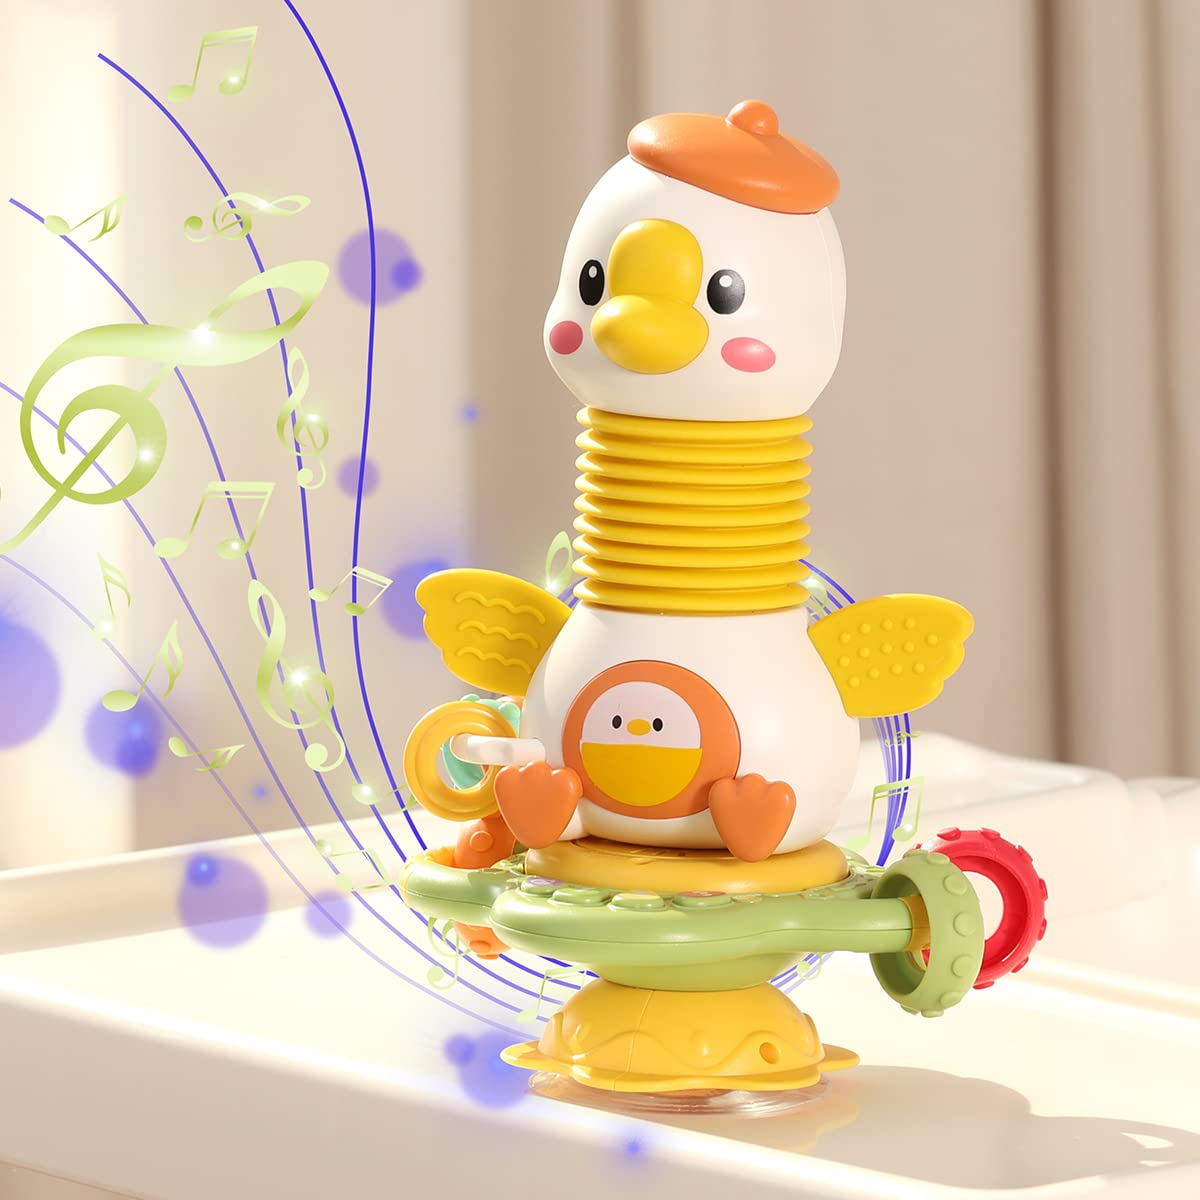 2 in 1 Baby Toys High Chair Rattle Toy with Suction Base Cup for Babies 6-12 Months Infant Music Fine Motor Montessori Toy for Toddler Activities 1 2 3 Year Old Boy Girl Stroller Travel Essentials Goose